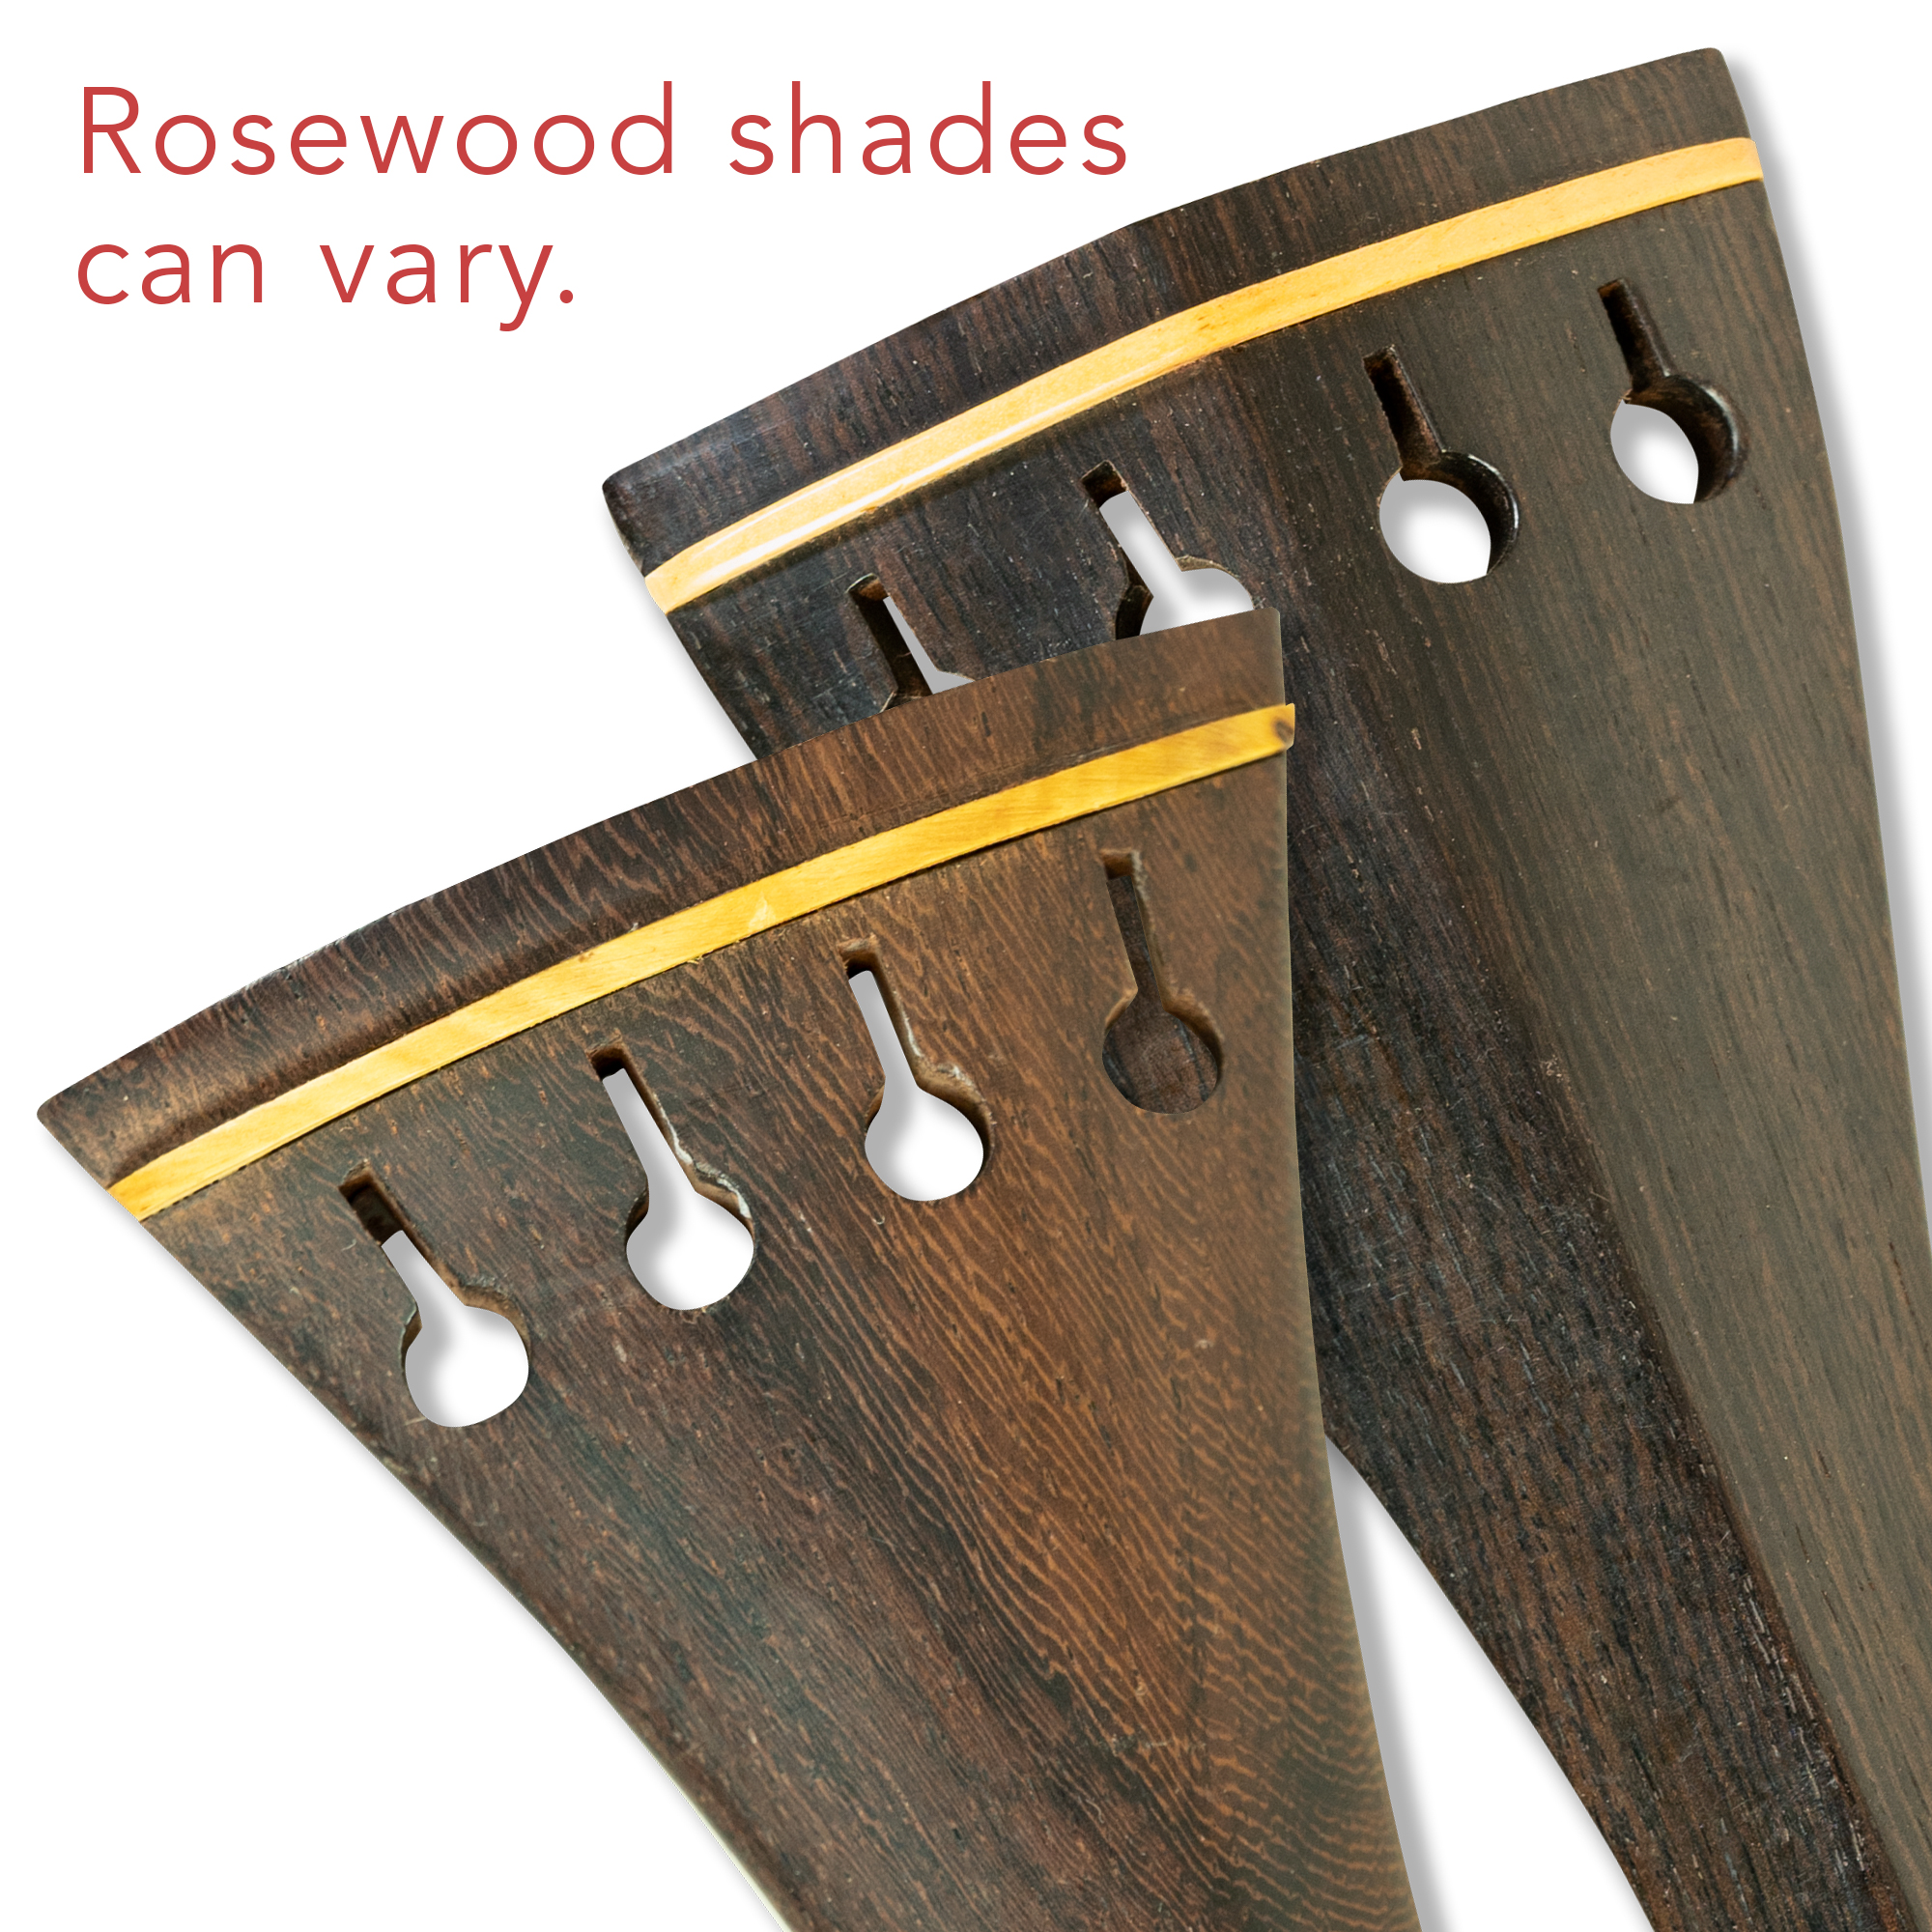 Hill Rosewood-Brass Tailpiece in action